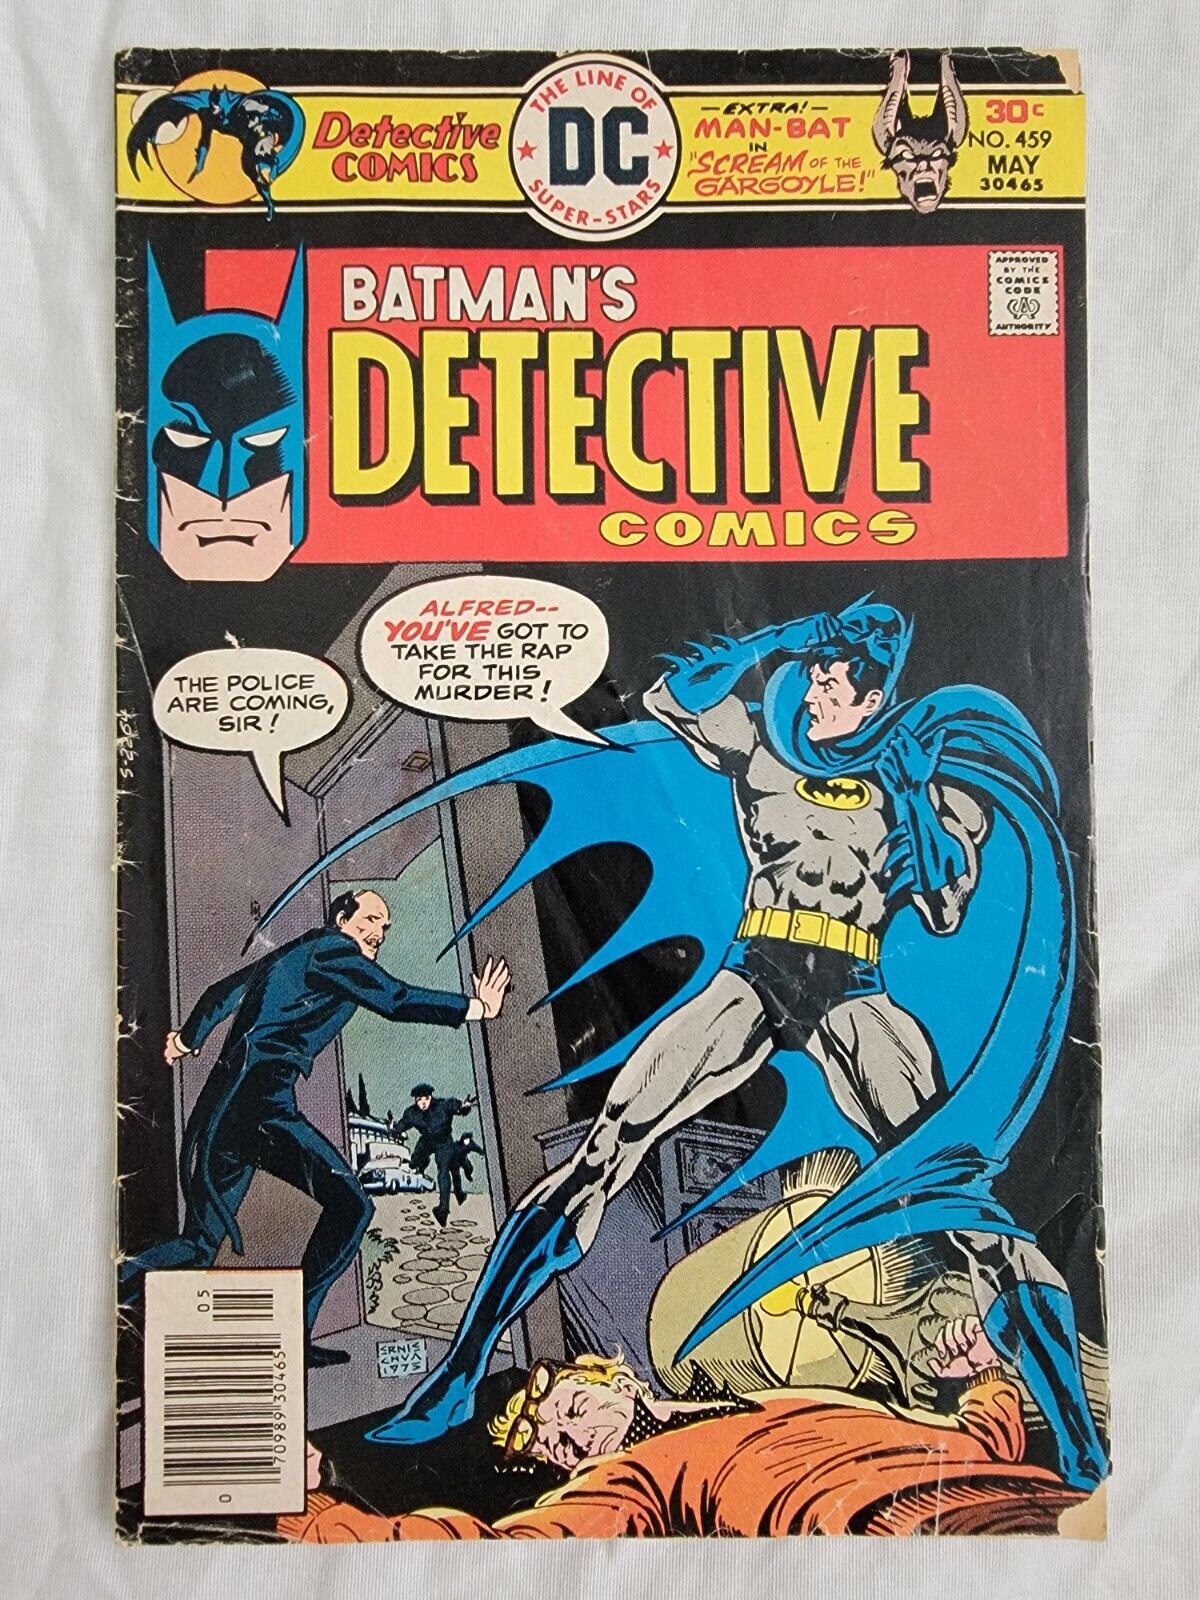 Batman Detective Comics #459 Cover by Ernie: Save on Shipping Details Inside